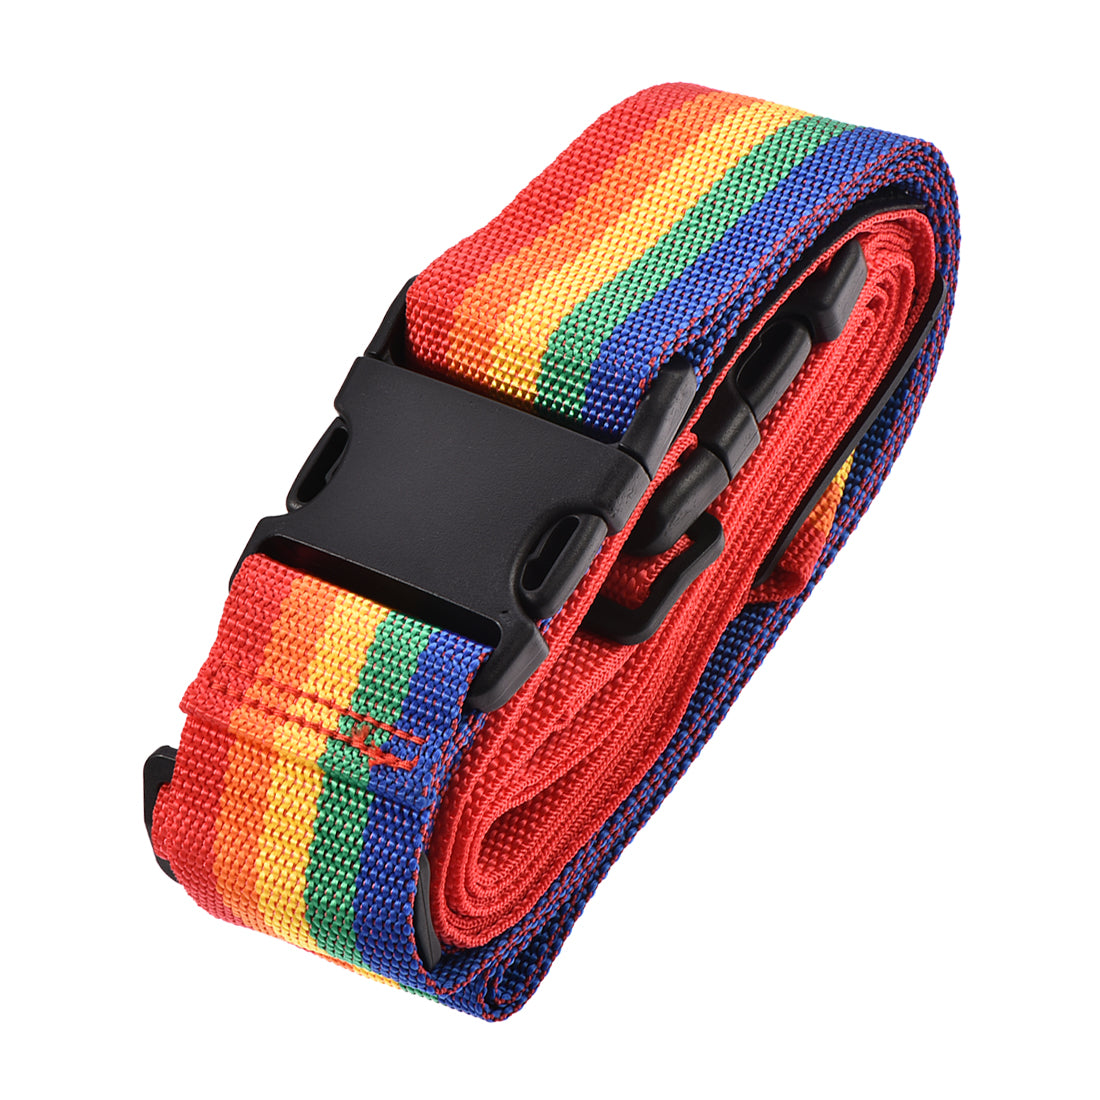 uxcell Uxcell Luggage Strap Suitcase Belt with 2 Buckles, 2Mx5cm Cross Adjustable PP Travel Packing Accessory, Multi Color (Red Orange Yellow Green Blue)